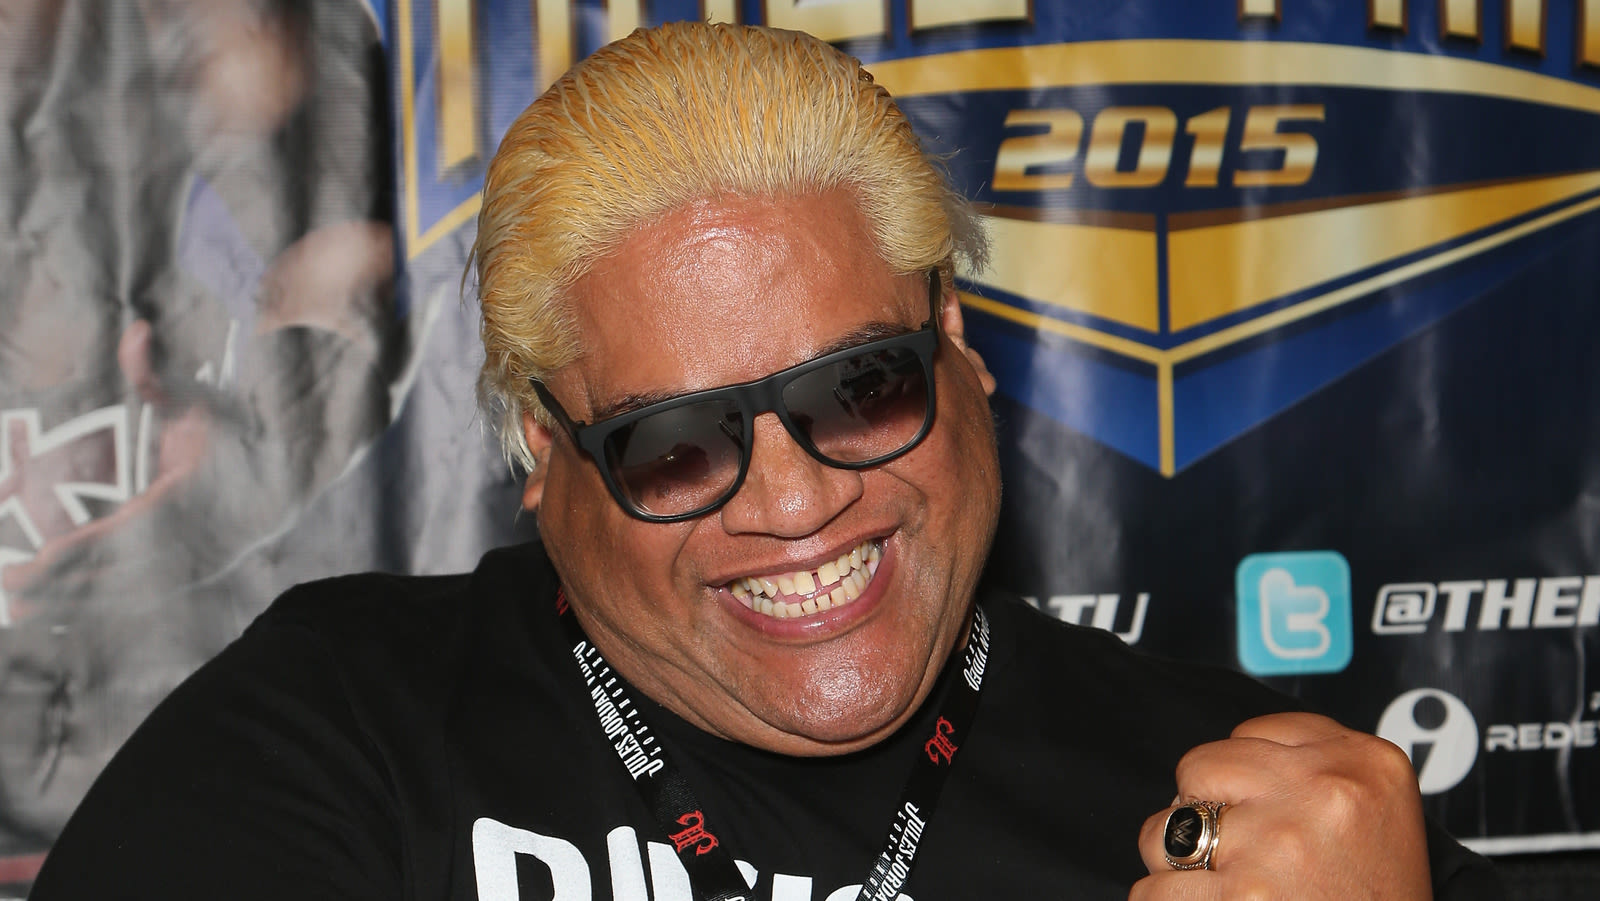 WWE Hall Of Famer Rikishi Shares His Experience At Service For Uncle Sika Anoa'i - Wrestling Inc.